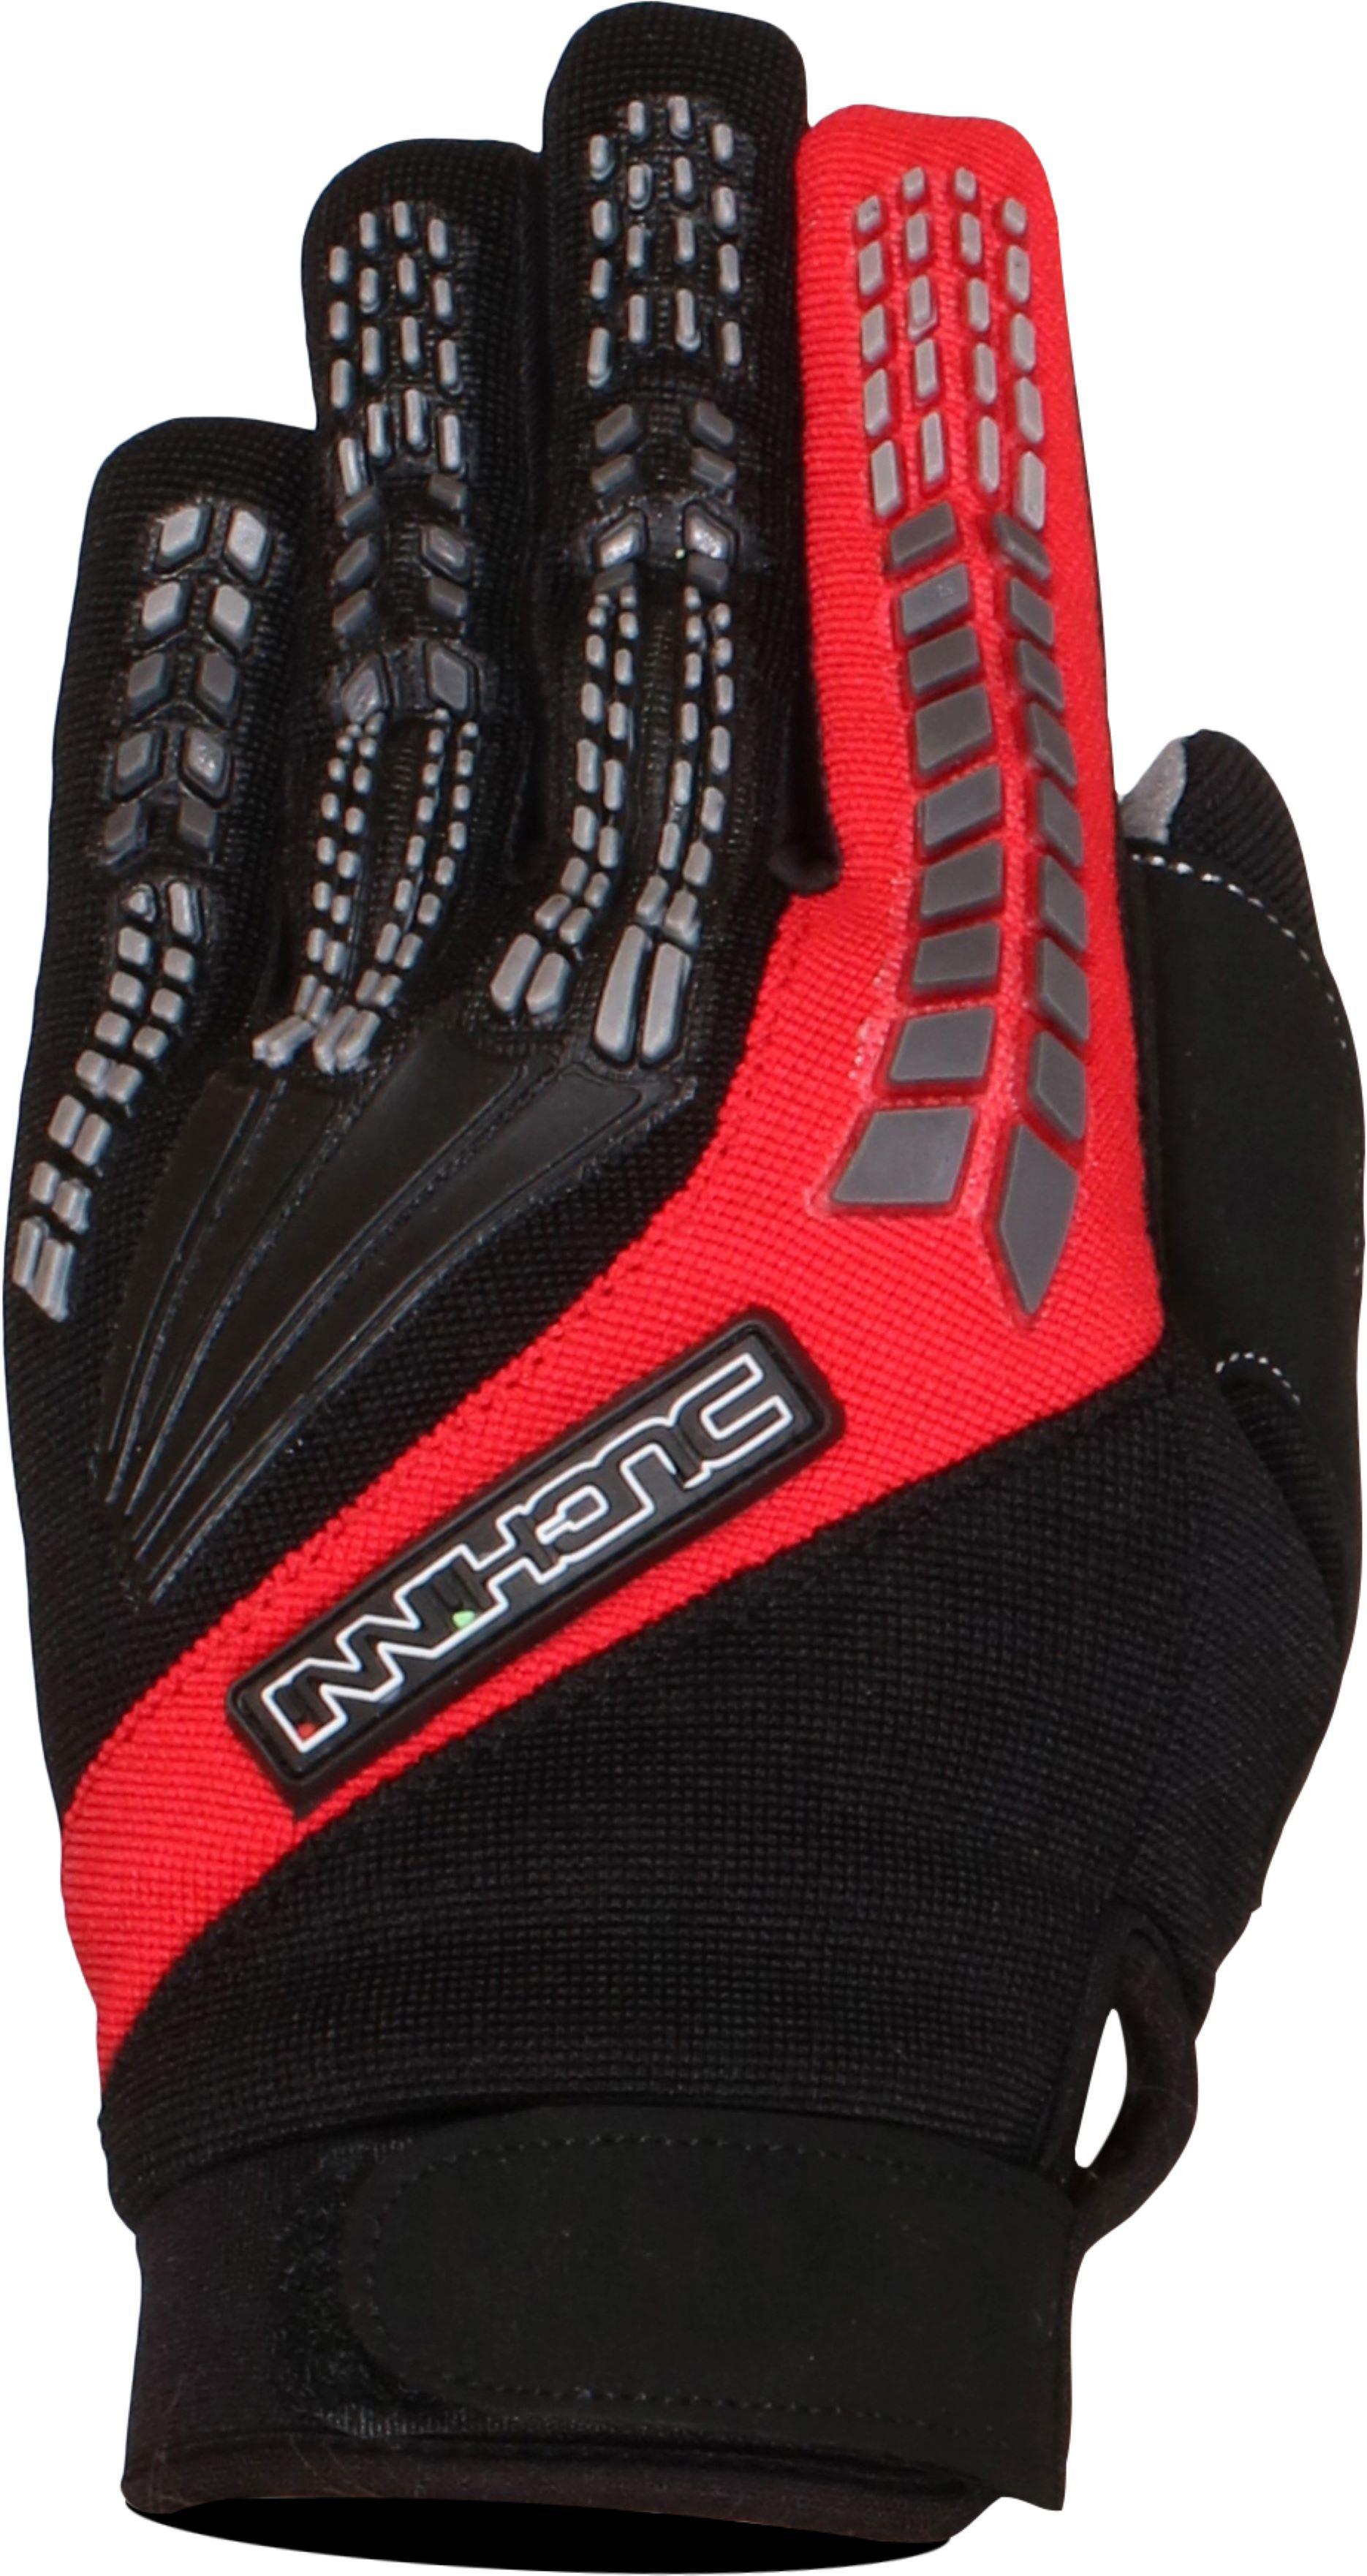 Duchinni Focus Motorcycle Gloves - Black And Red, L